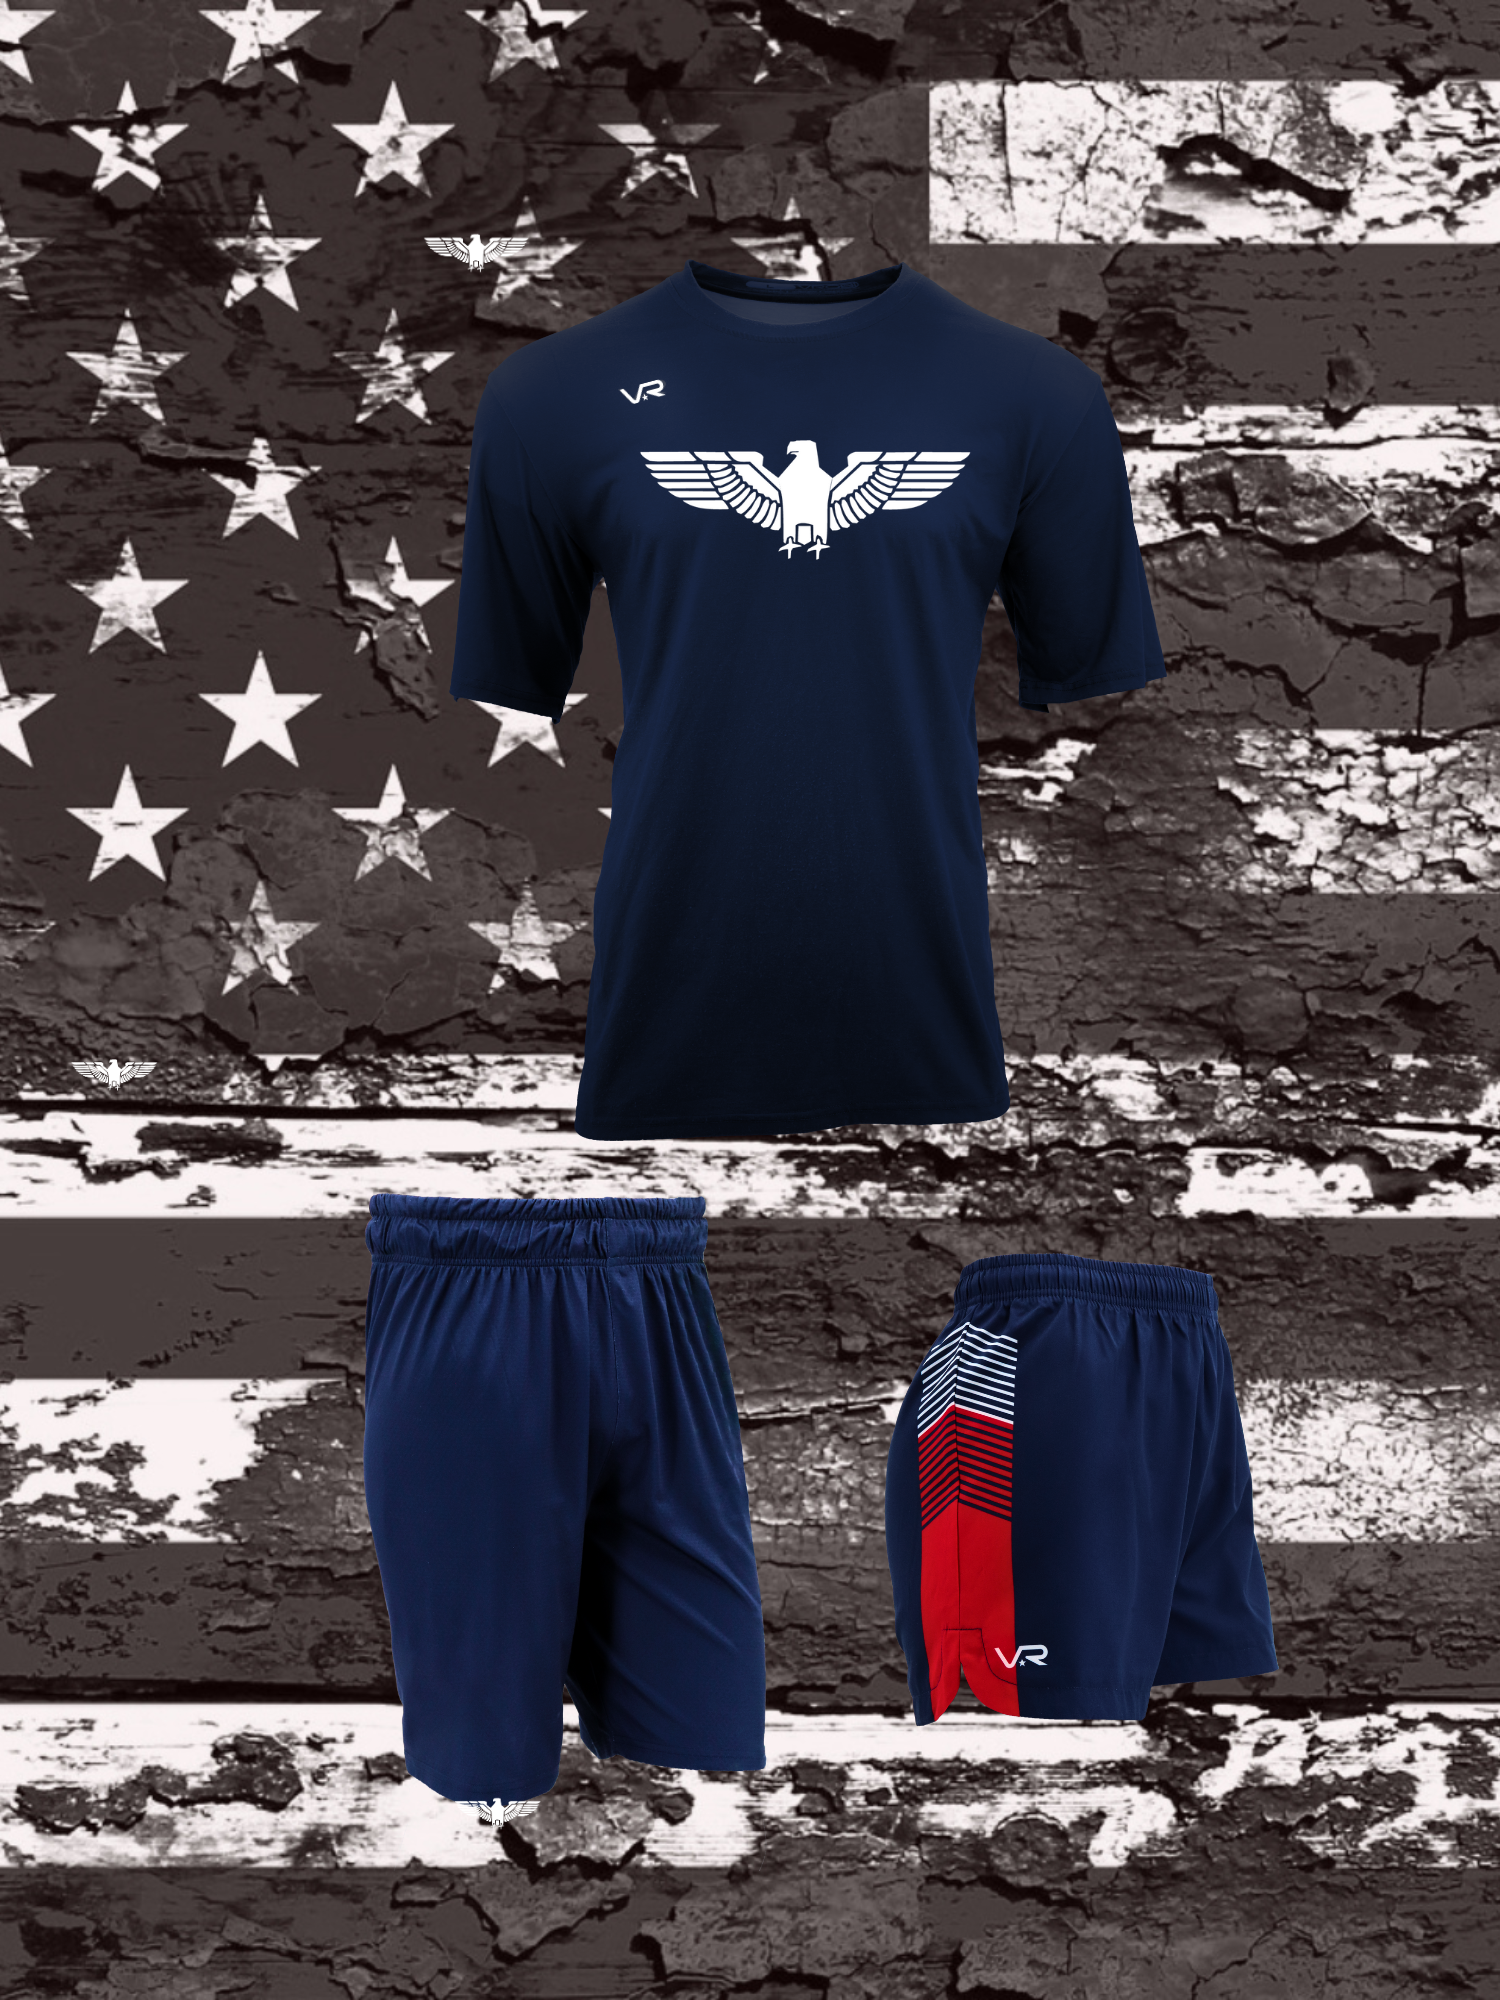 Commander Team Package showing T-Shirt and Shorts